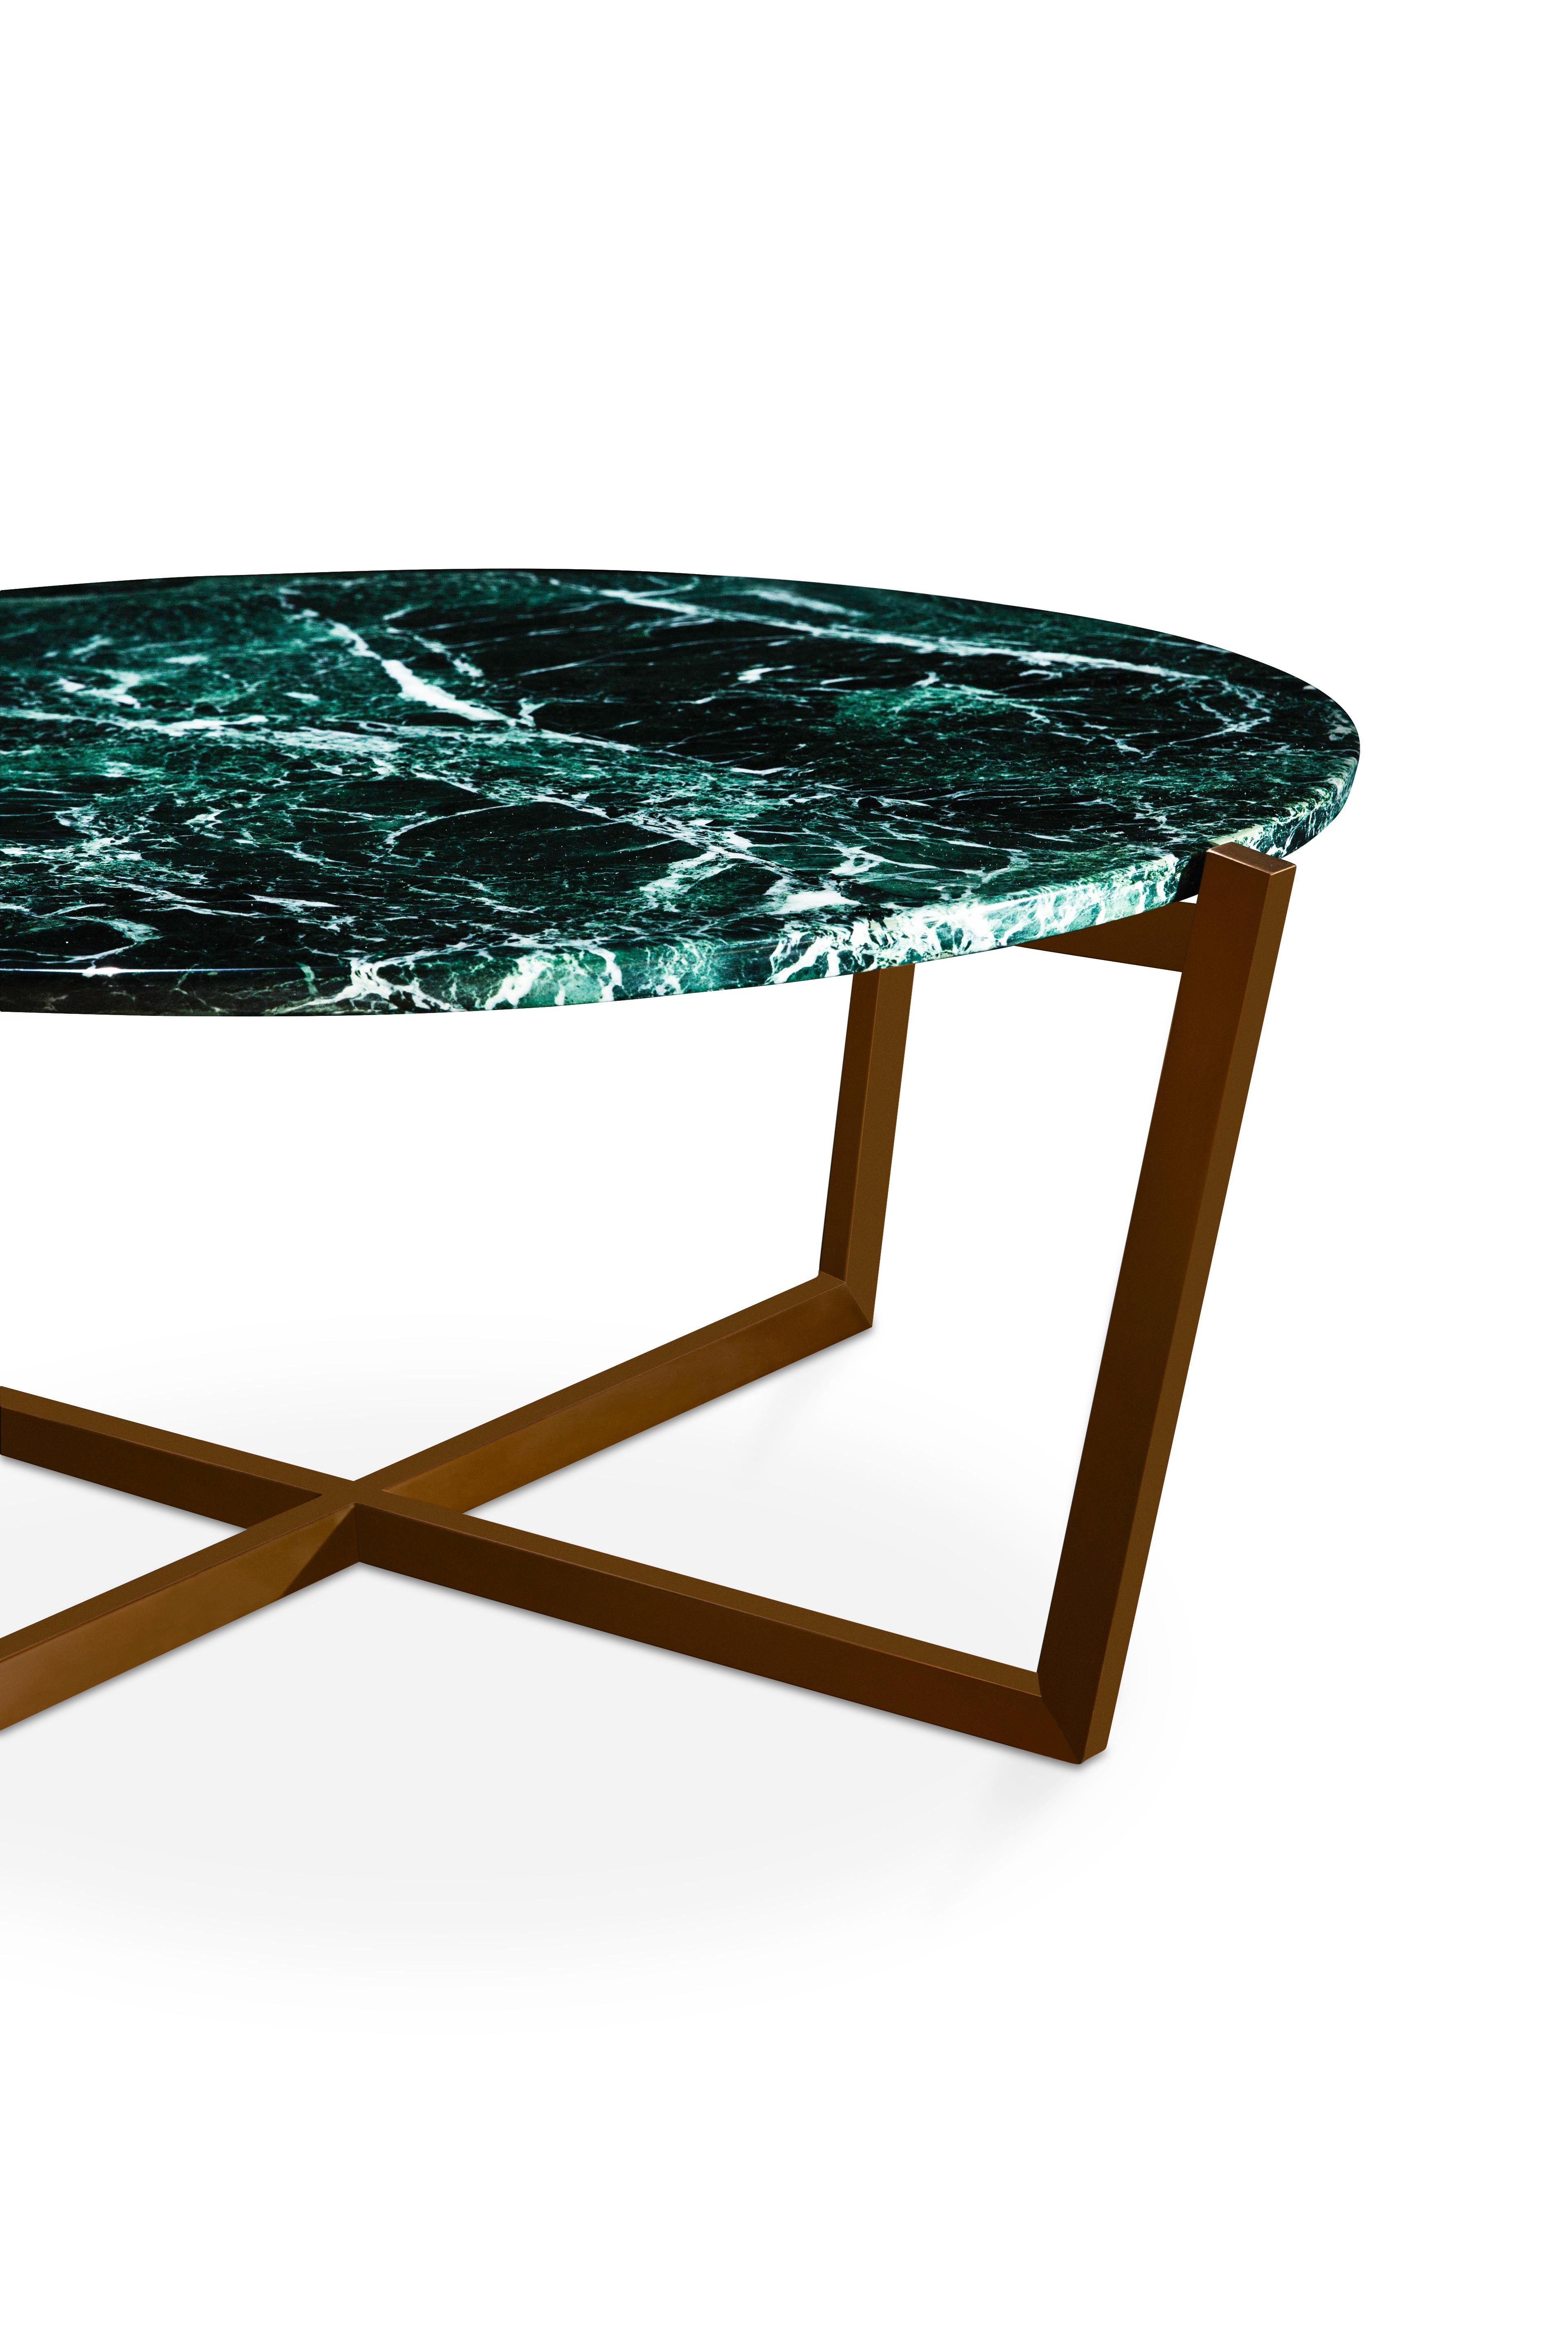 Hand-Crafted NORDST EMMA Dining Table, Italian Black Eagle Marble, Danish Modern Design, New For Sale